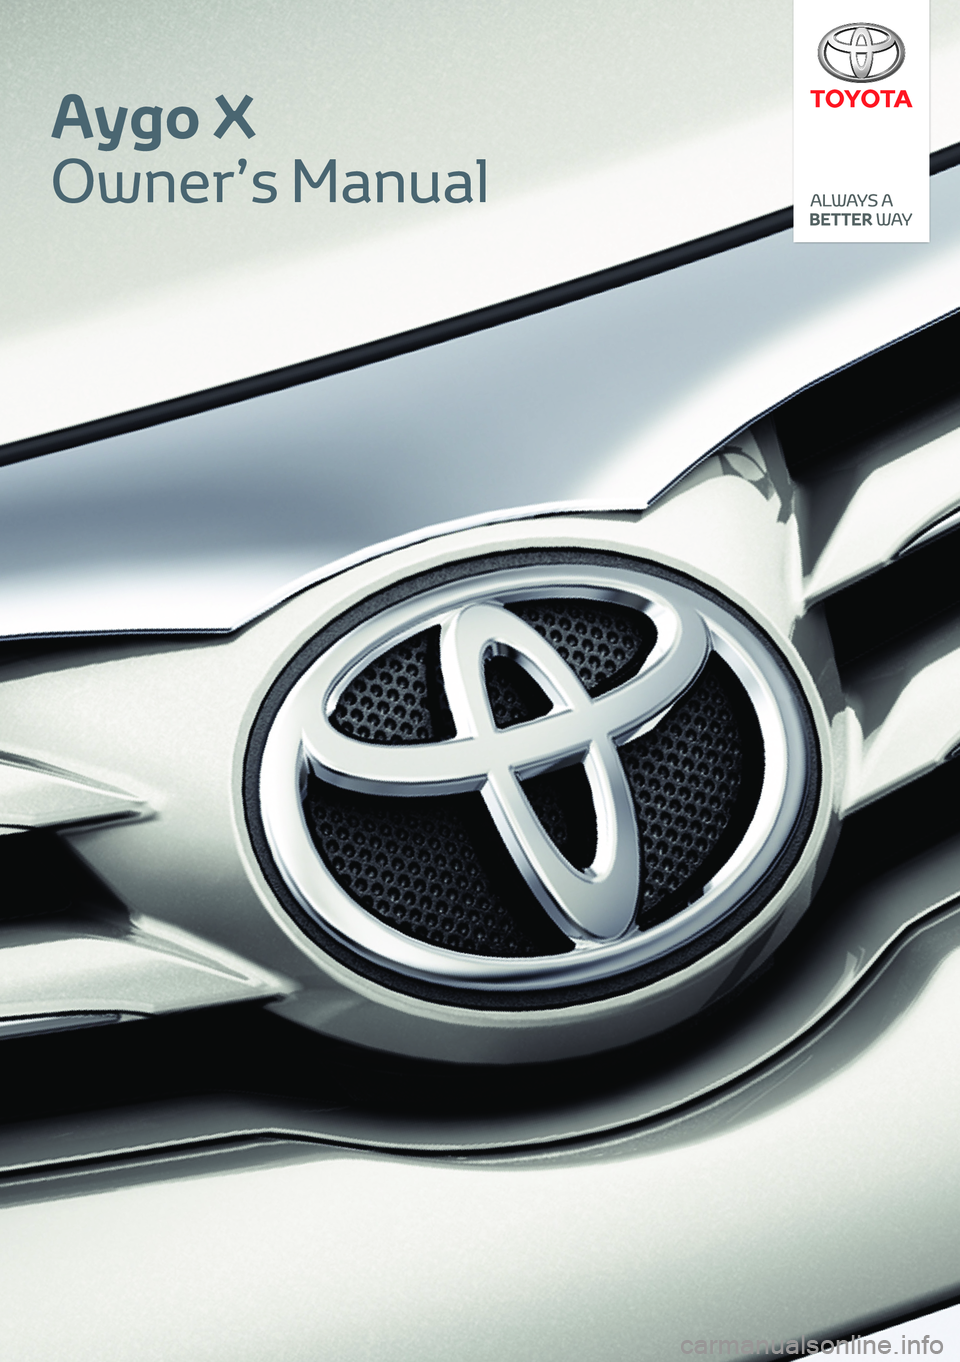 TOYOTA AYGO X 2022  Manuale de Empleo (in Spanish) Aygo X
Owner’s Manual 